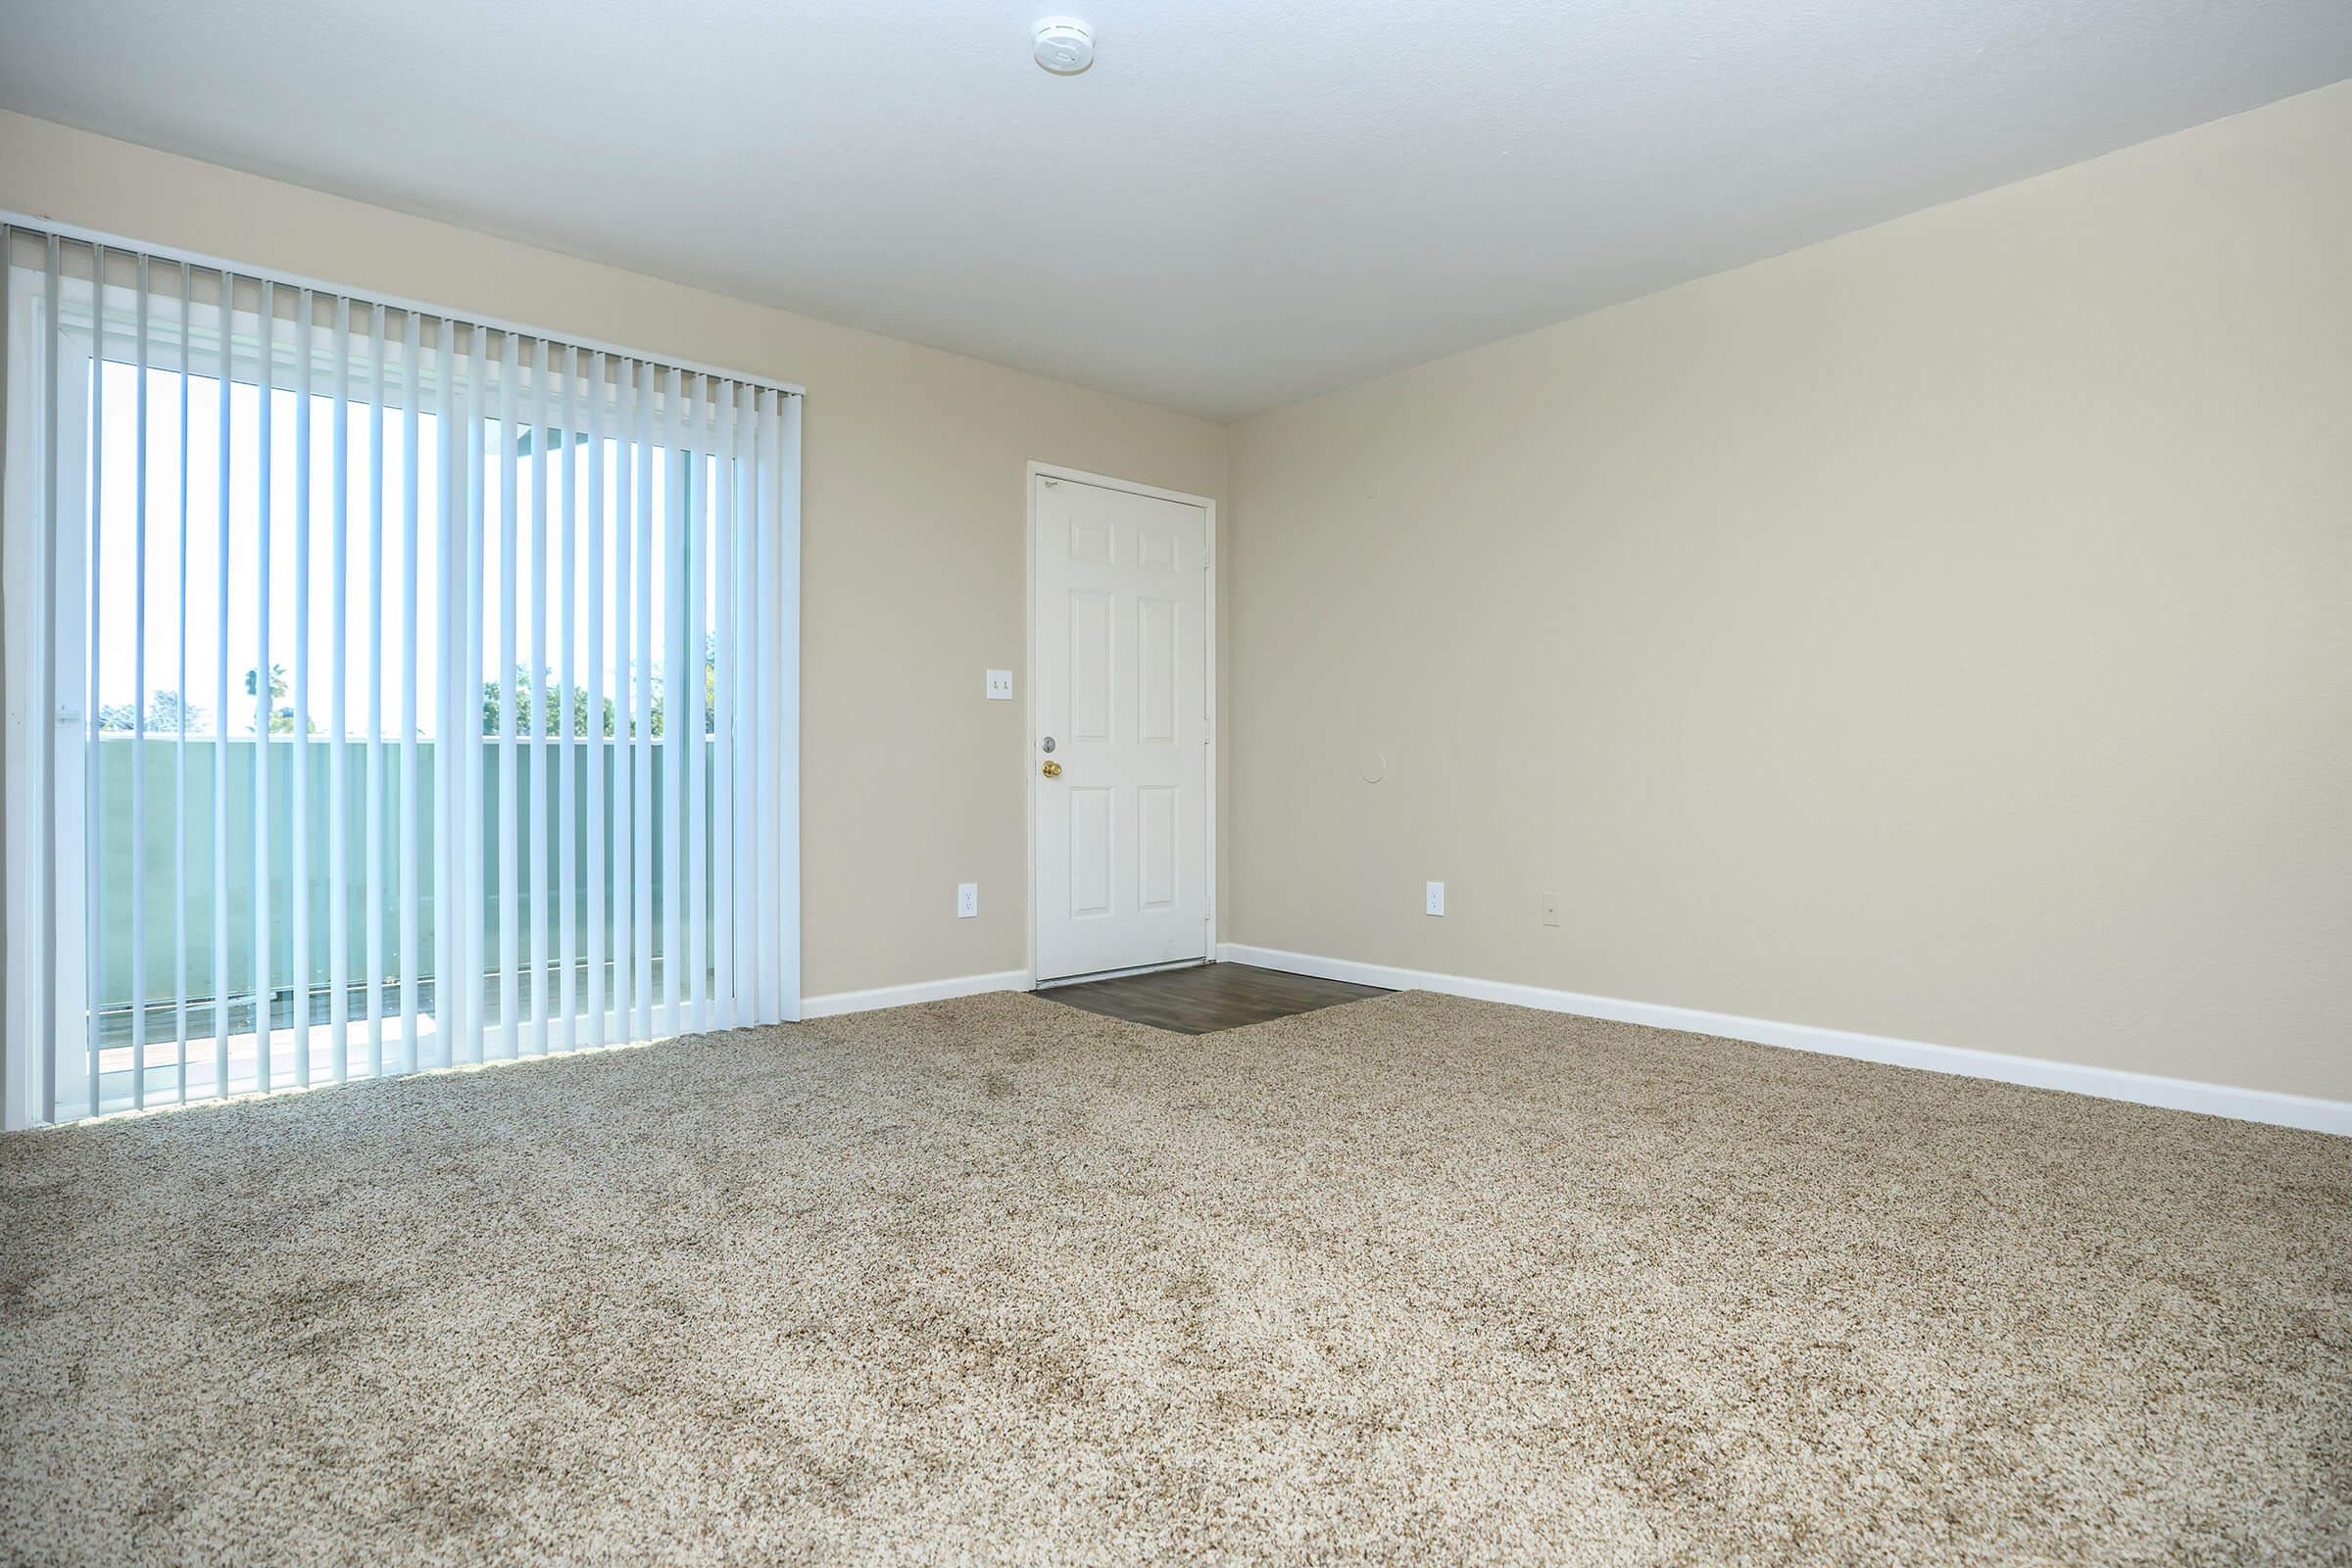 Living room with open window blinds